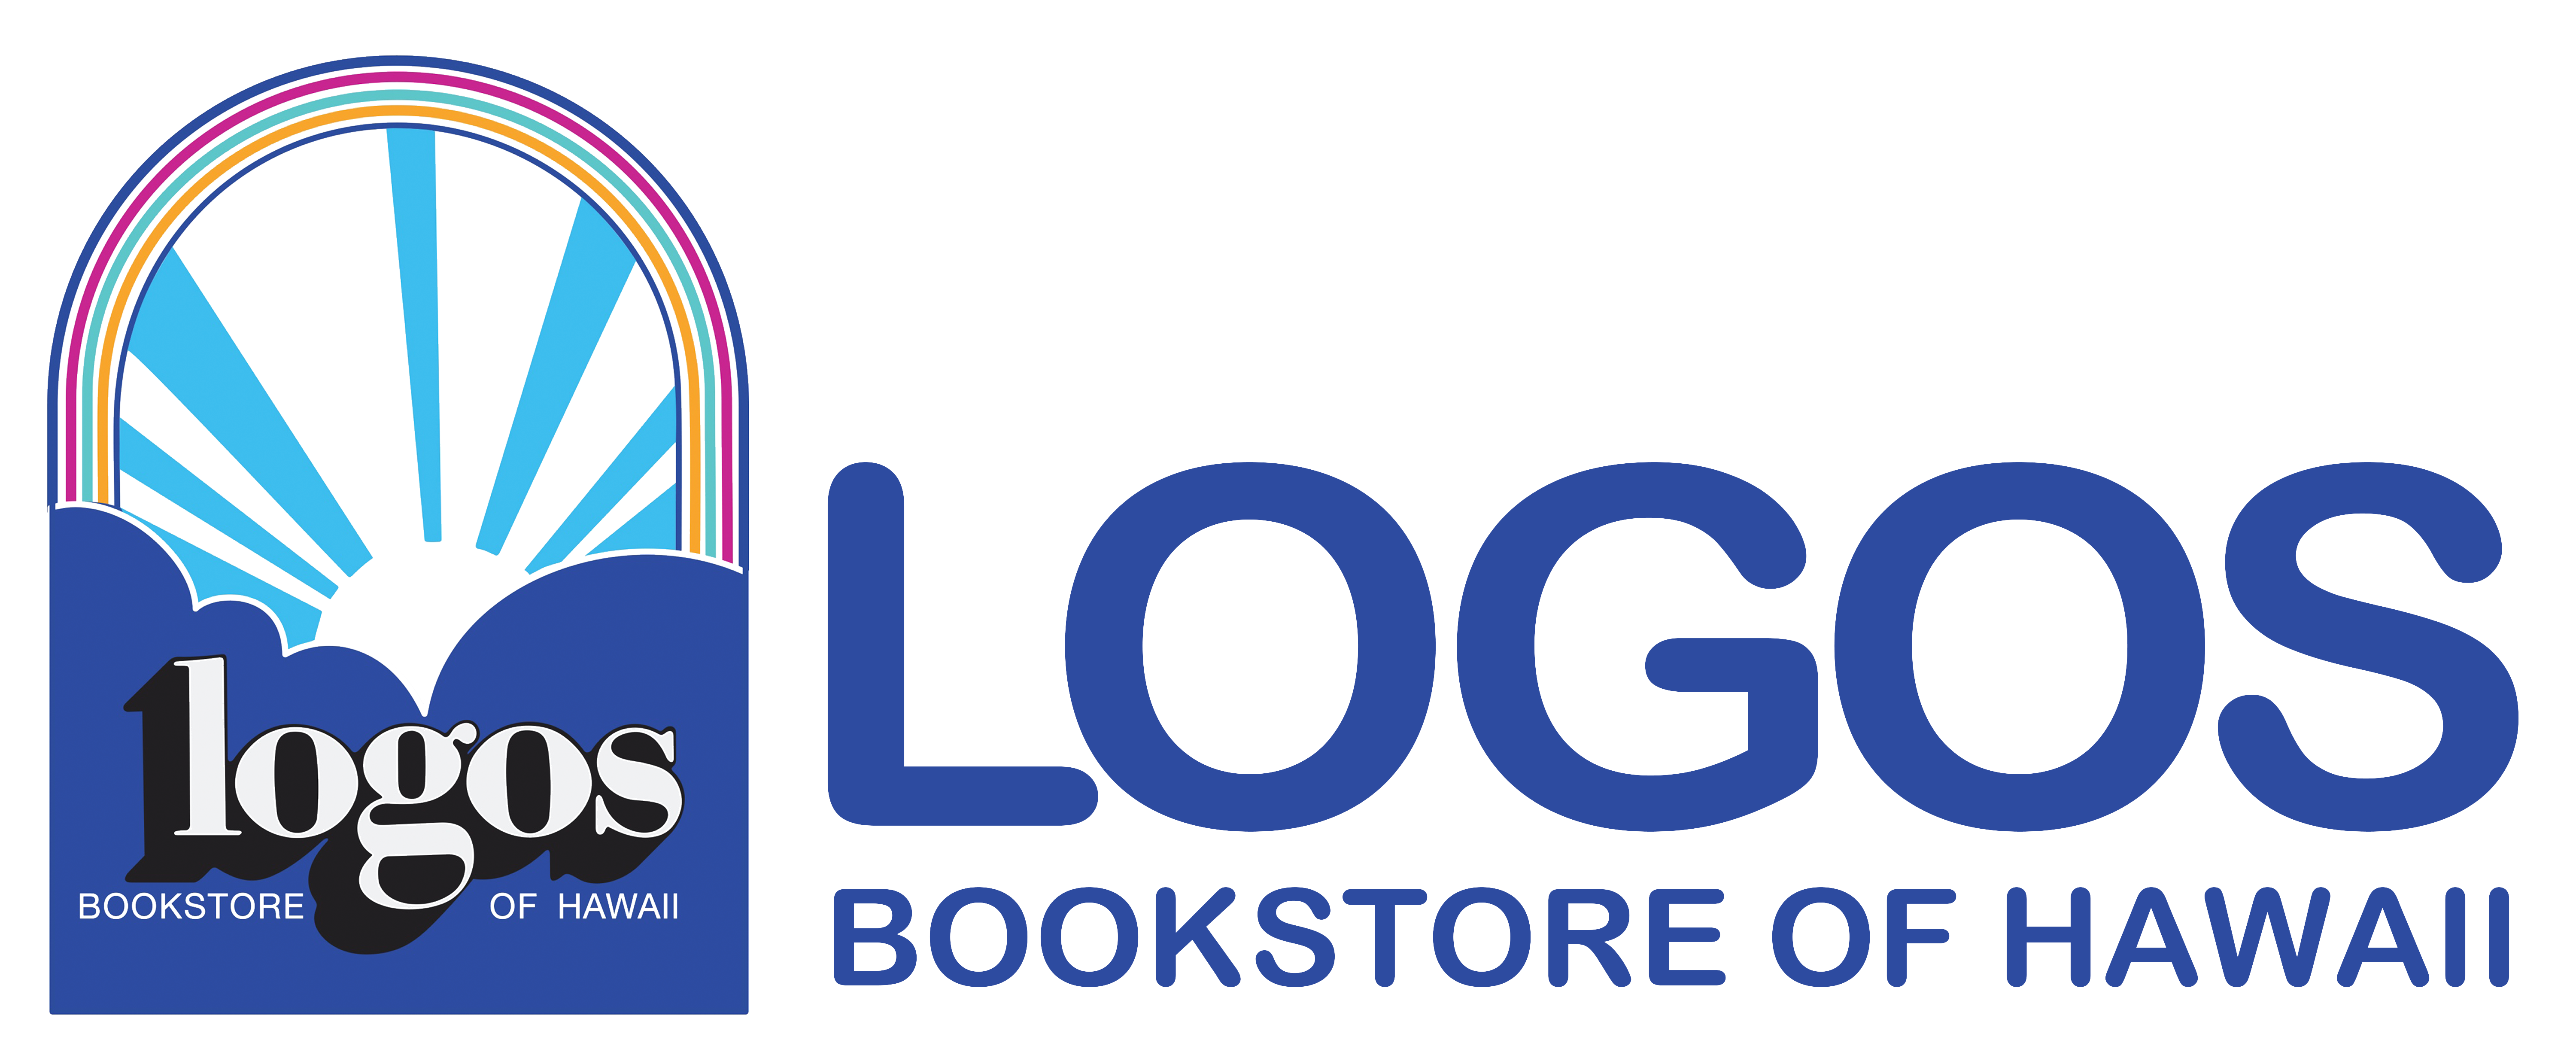 Bookstore Logo designs, themes, templates and downloadable graphic elements  on Dribbble